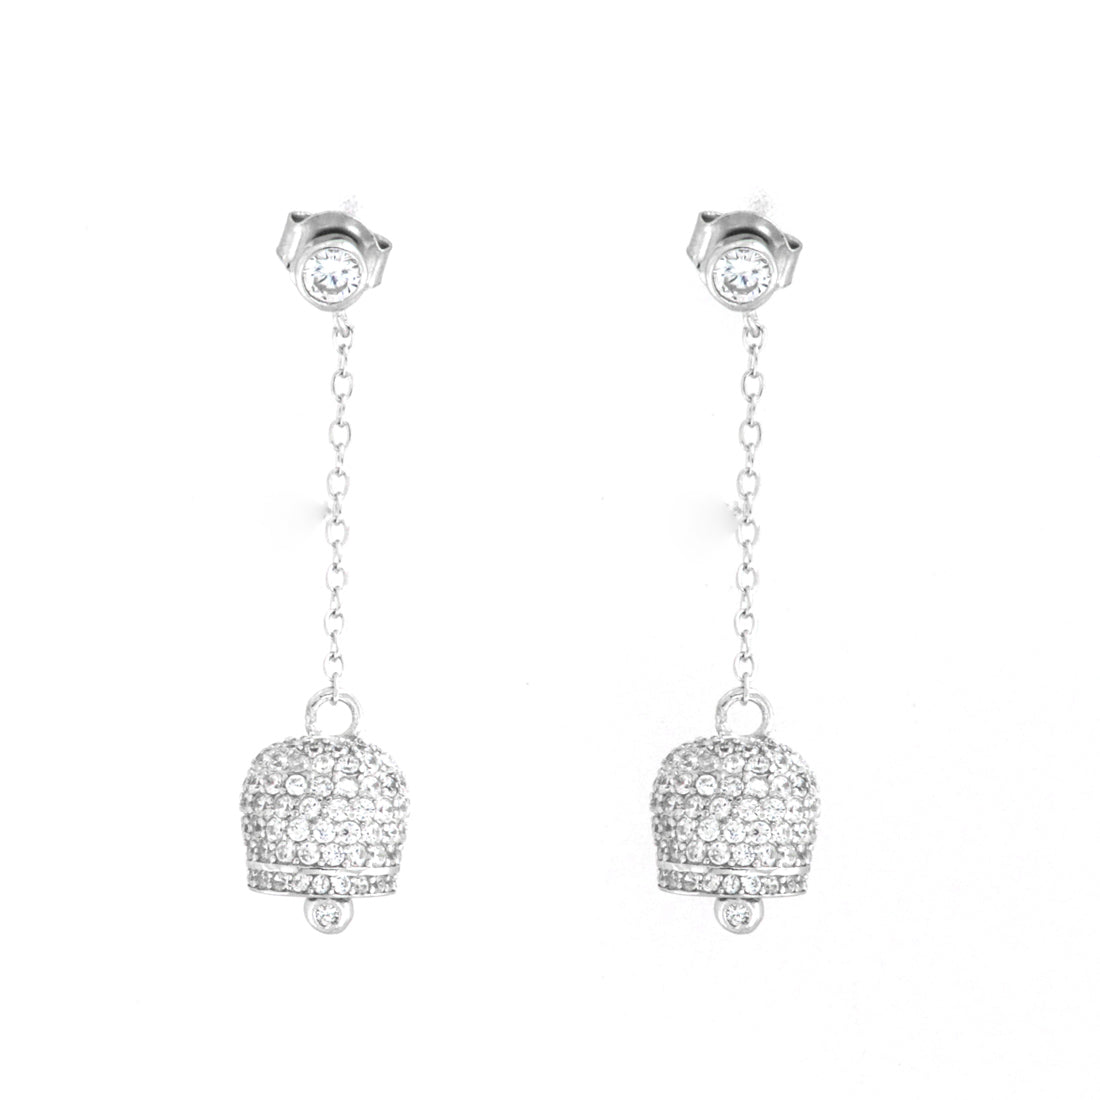 925 silver earrings with pendant bell, embellished with bright white zirconi